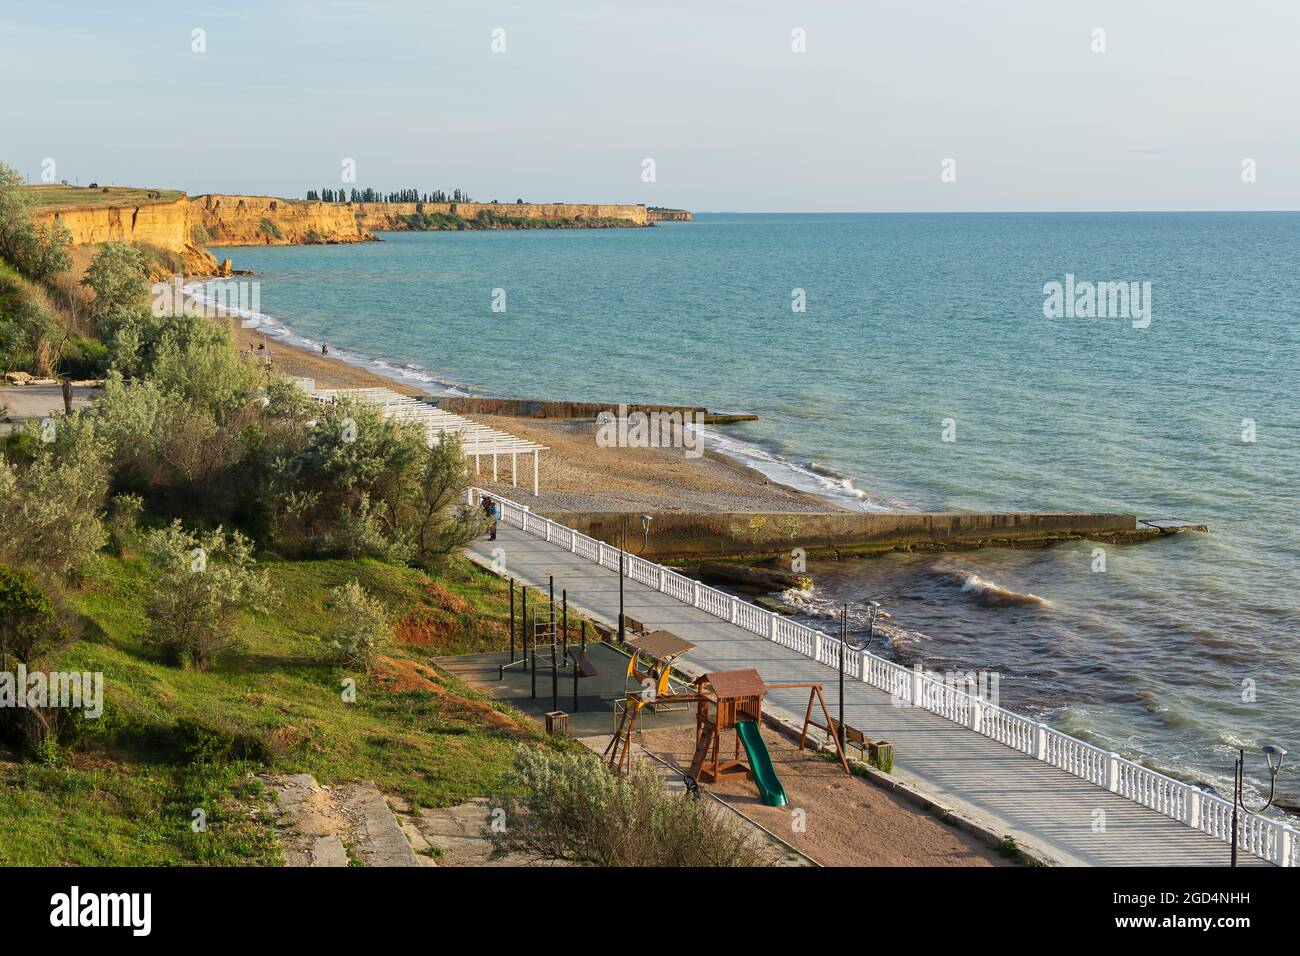 Crimea, the Village of Andreevka on May 23, 2021. A beach with breakwaters, ennobled with a Playground without people. A deserted view outside the swi Stock Photo